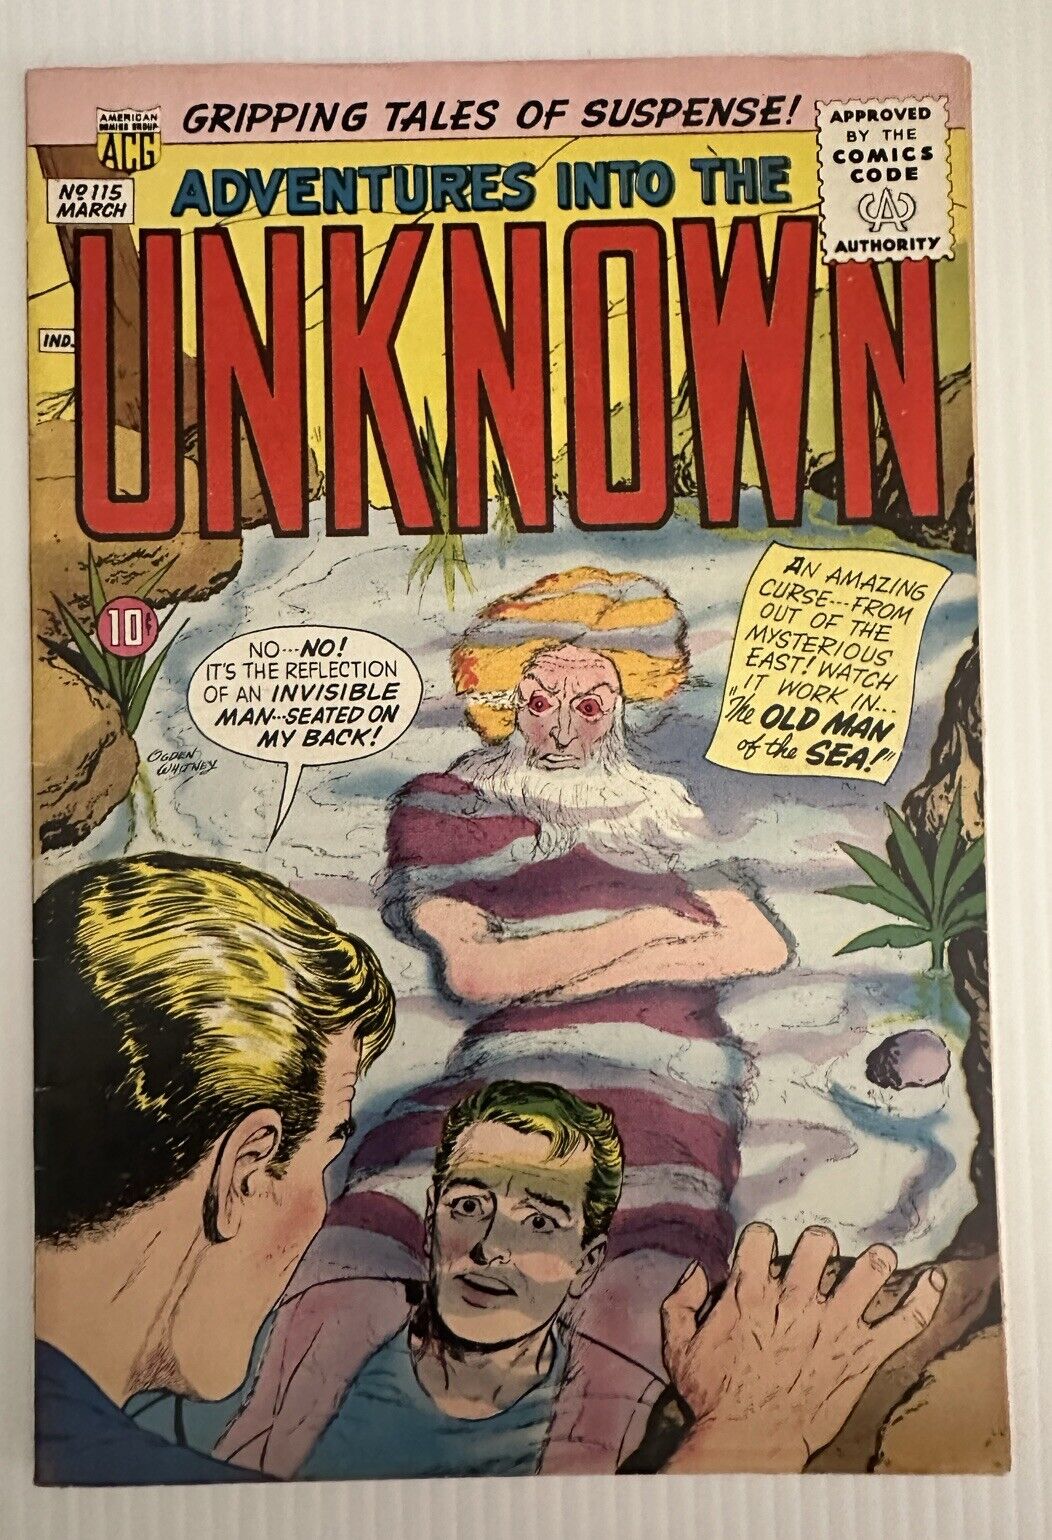 Adventures Into The UNKNOWN #115 1960 (VF) Silver Age ACG